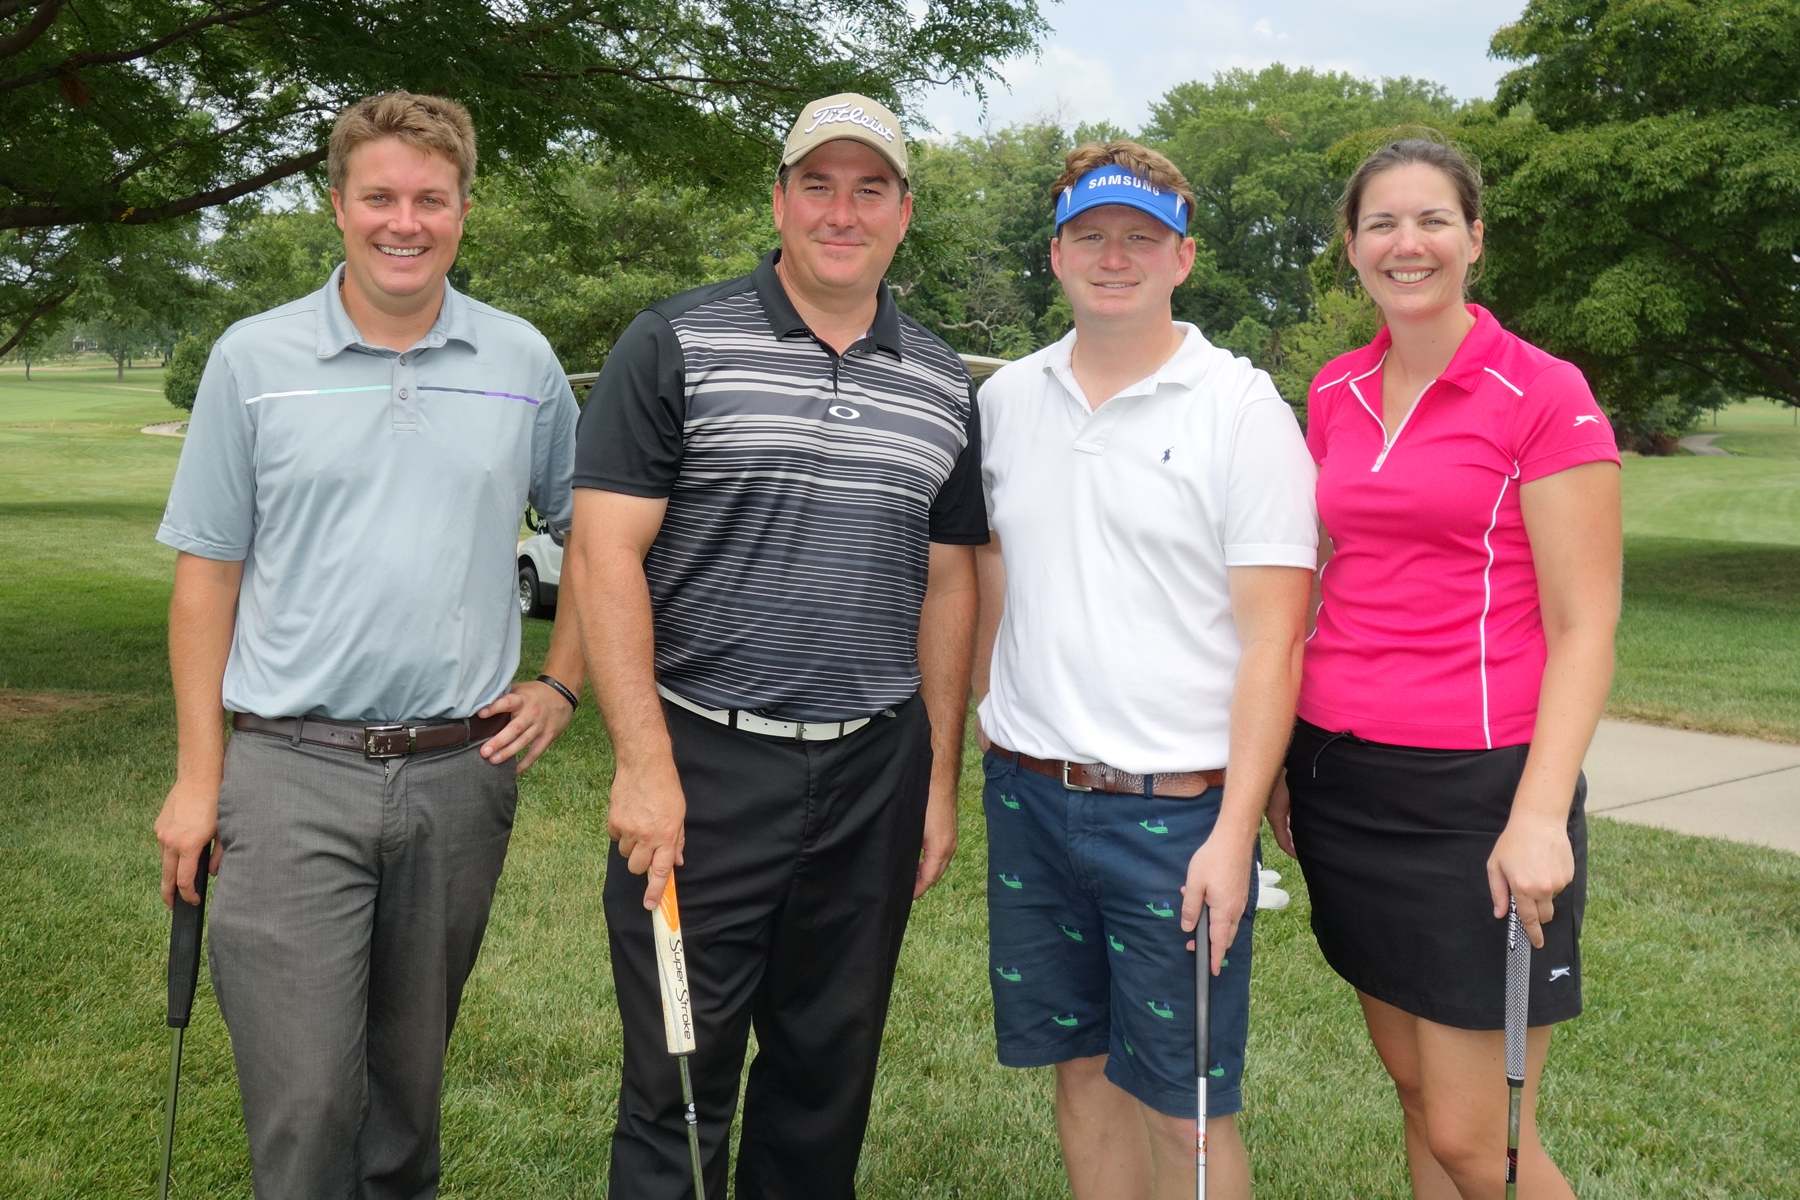 The Yeager Law Firm foursome at the 2015 Combined Campaign Cup